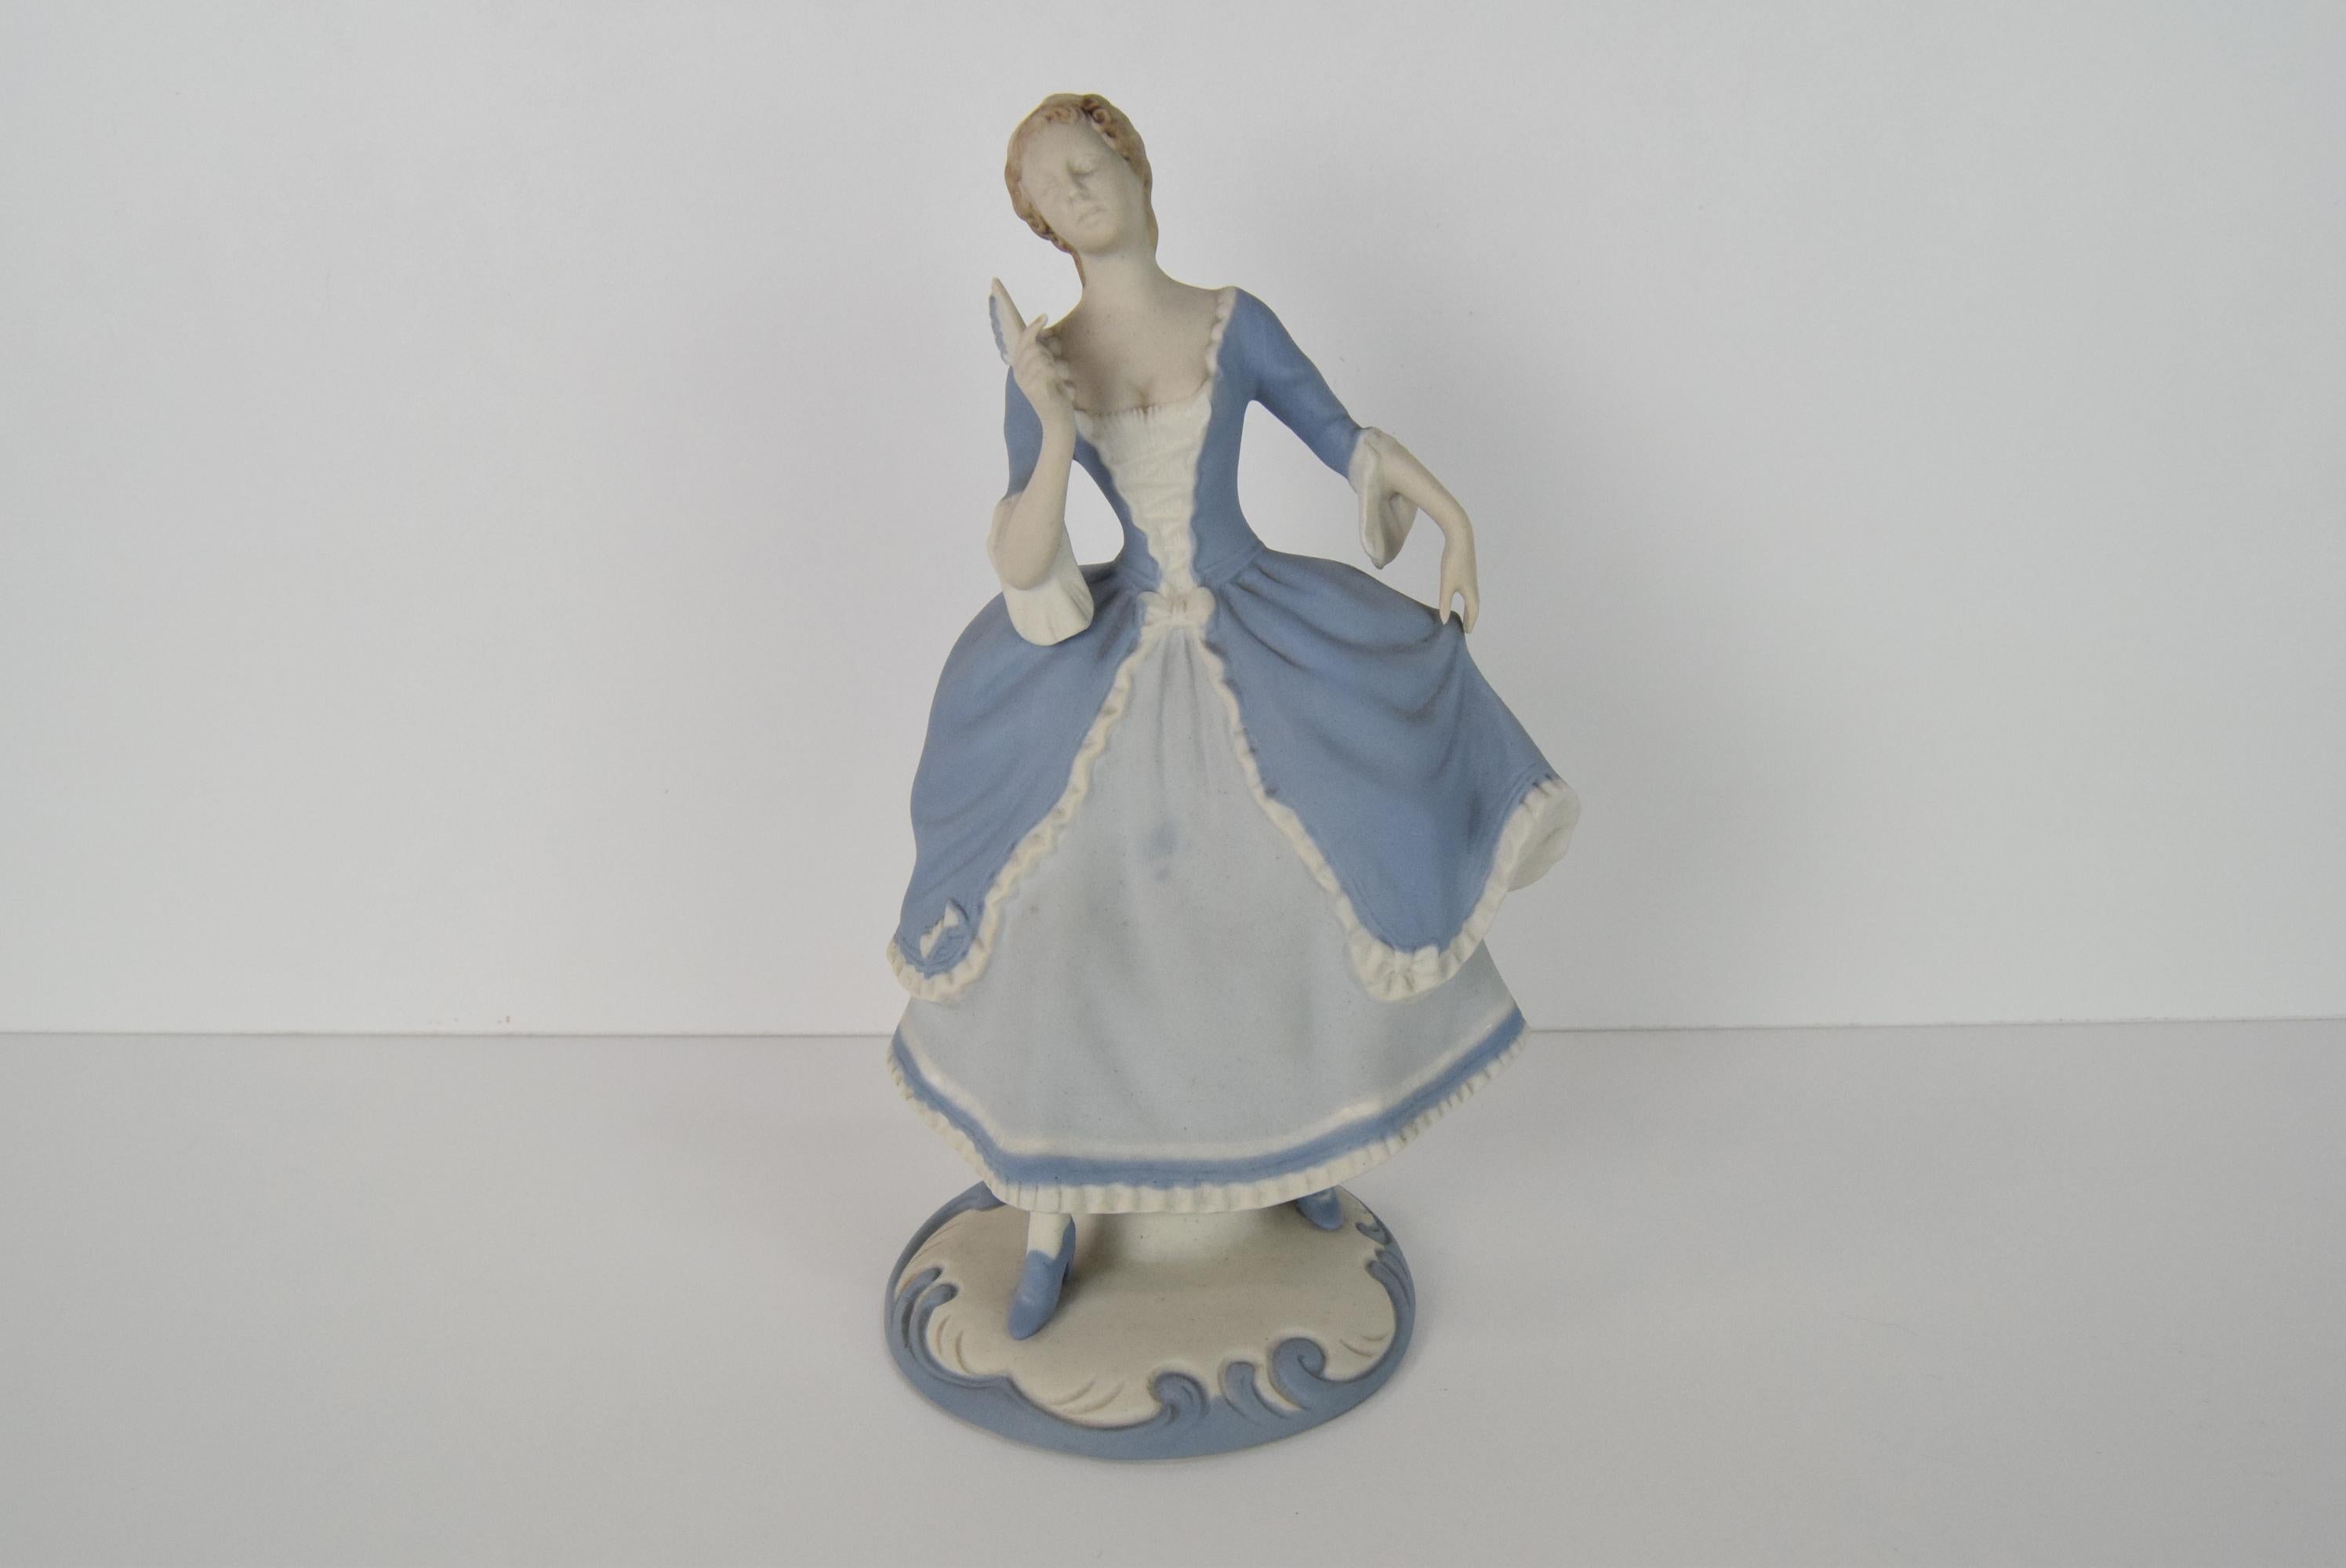 
The statuette was designed by the designer of the Duchc porcelain factory Elly Strobach Königová 1908-2002
Her porcelain figurines are known and loved worldwide for her luxurious artistic style.
Signed
Good Original Condition